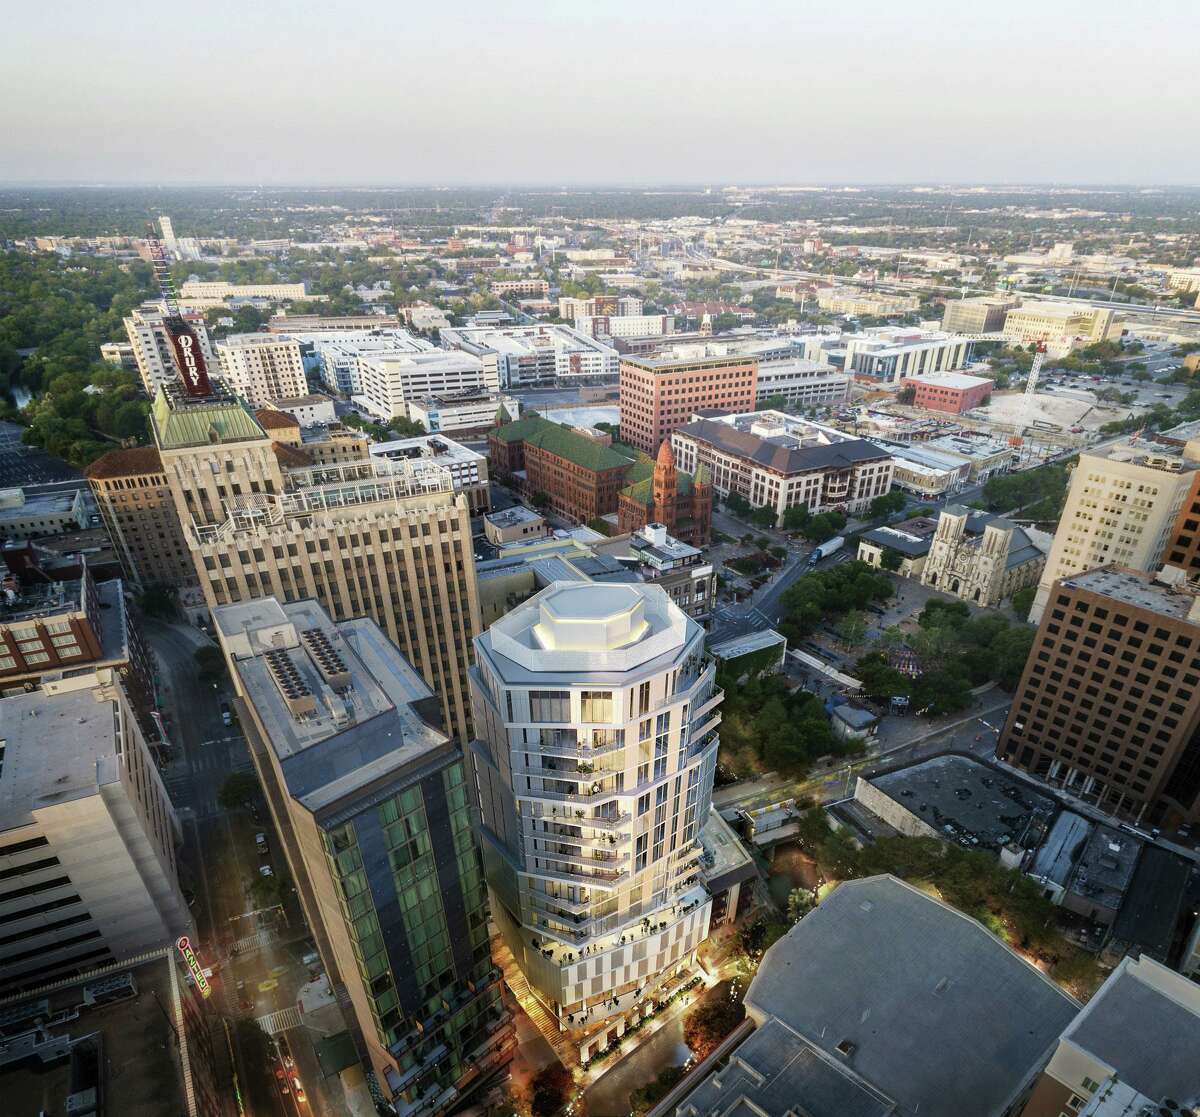 An aerial rendering of the Floodgate development in downtown San Antonio. Developer Keller Henderson expects the building to attract urban transplants from cities such as Los Angeles, New York and Chicago, as well as locals interested in walking to restaurants, bars and entertainment venues.